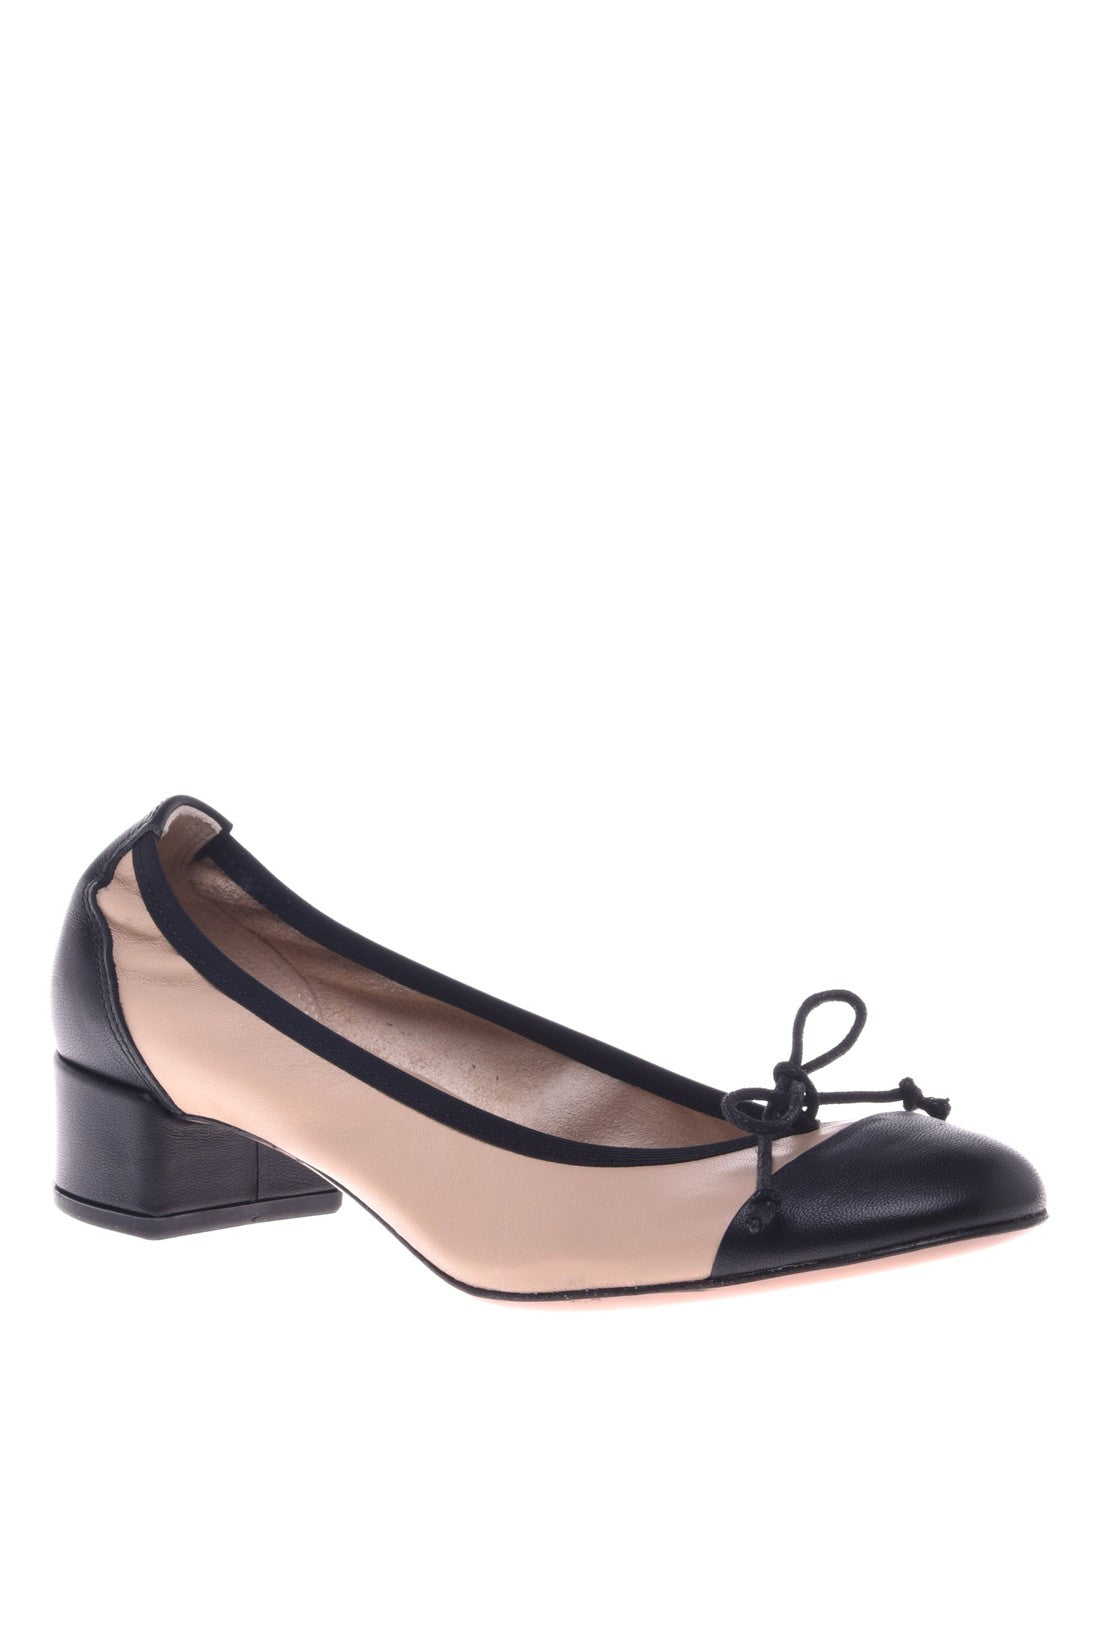 BALDININI-OUTLET-SALE-Ballerina-pump-in-black-and-powder-nappa-leather-Halbschuhe-35-ARCHIVE-COLLECTION.jpg